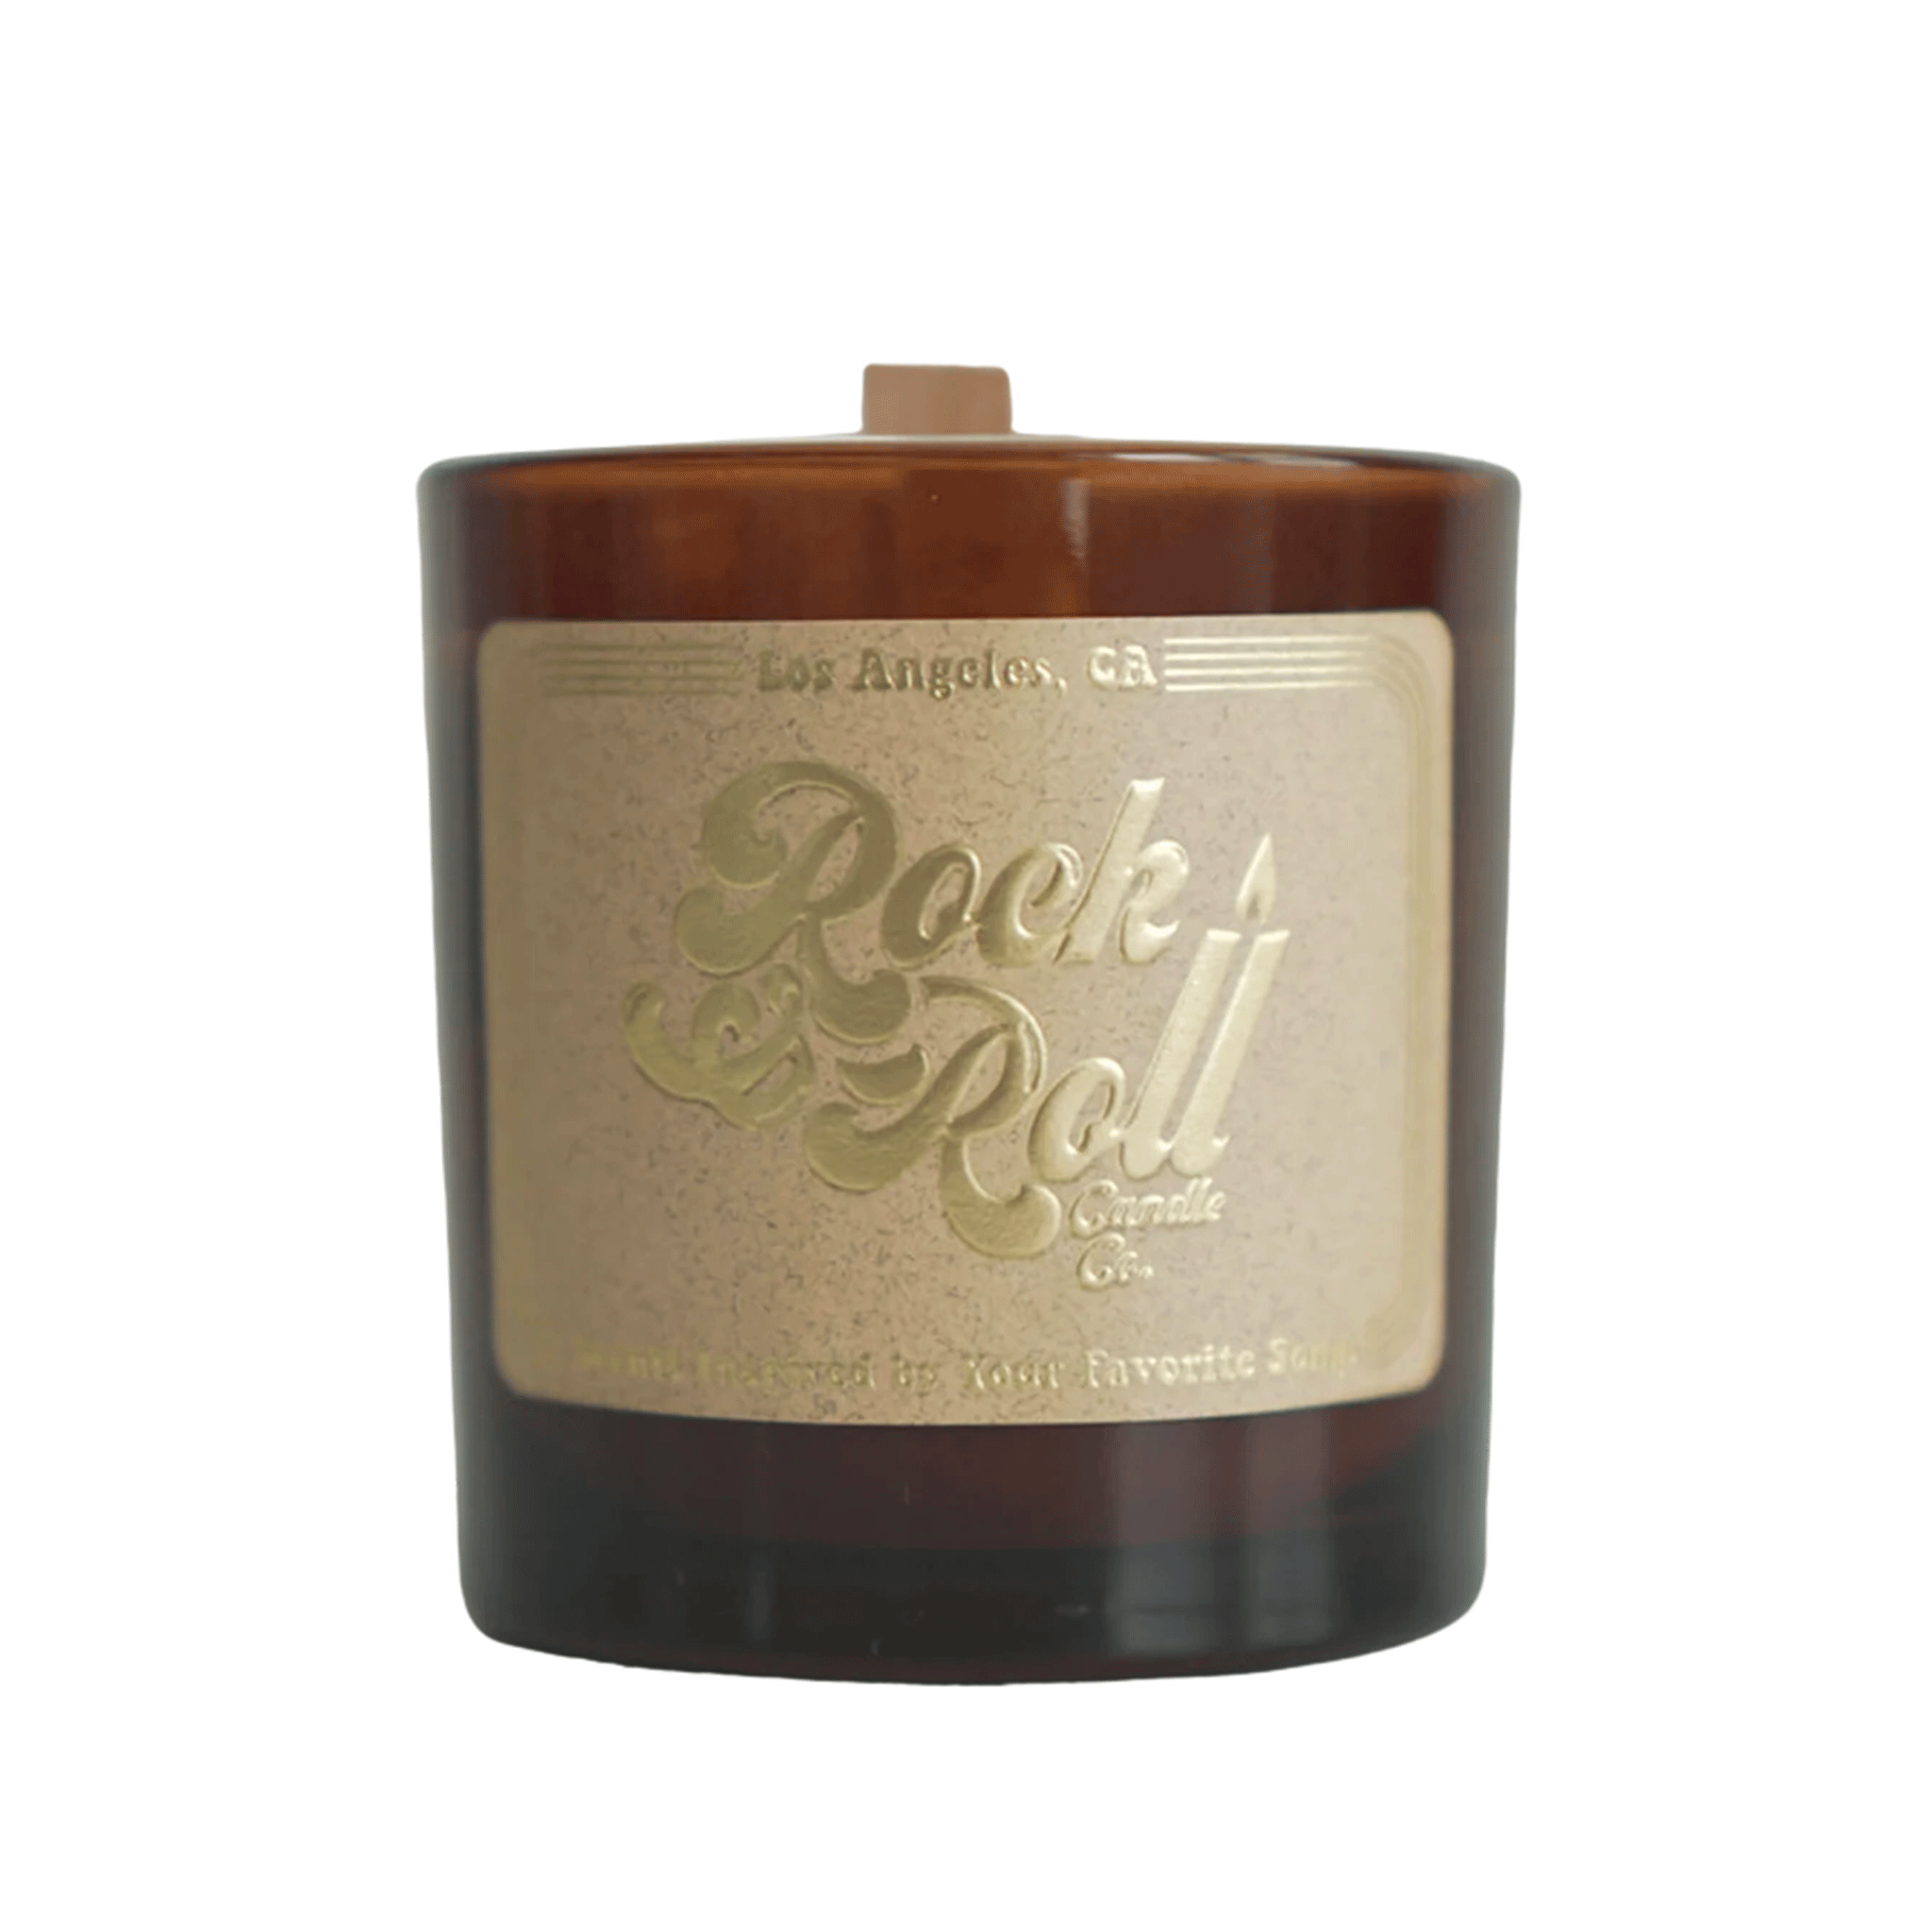 On a white background is a brown glass candle with a Kraft brown label on the front with a gold text that reads, "Rock & Roll Candle Co".